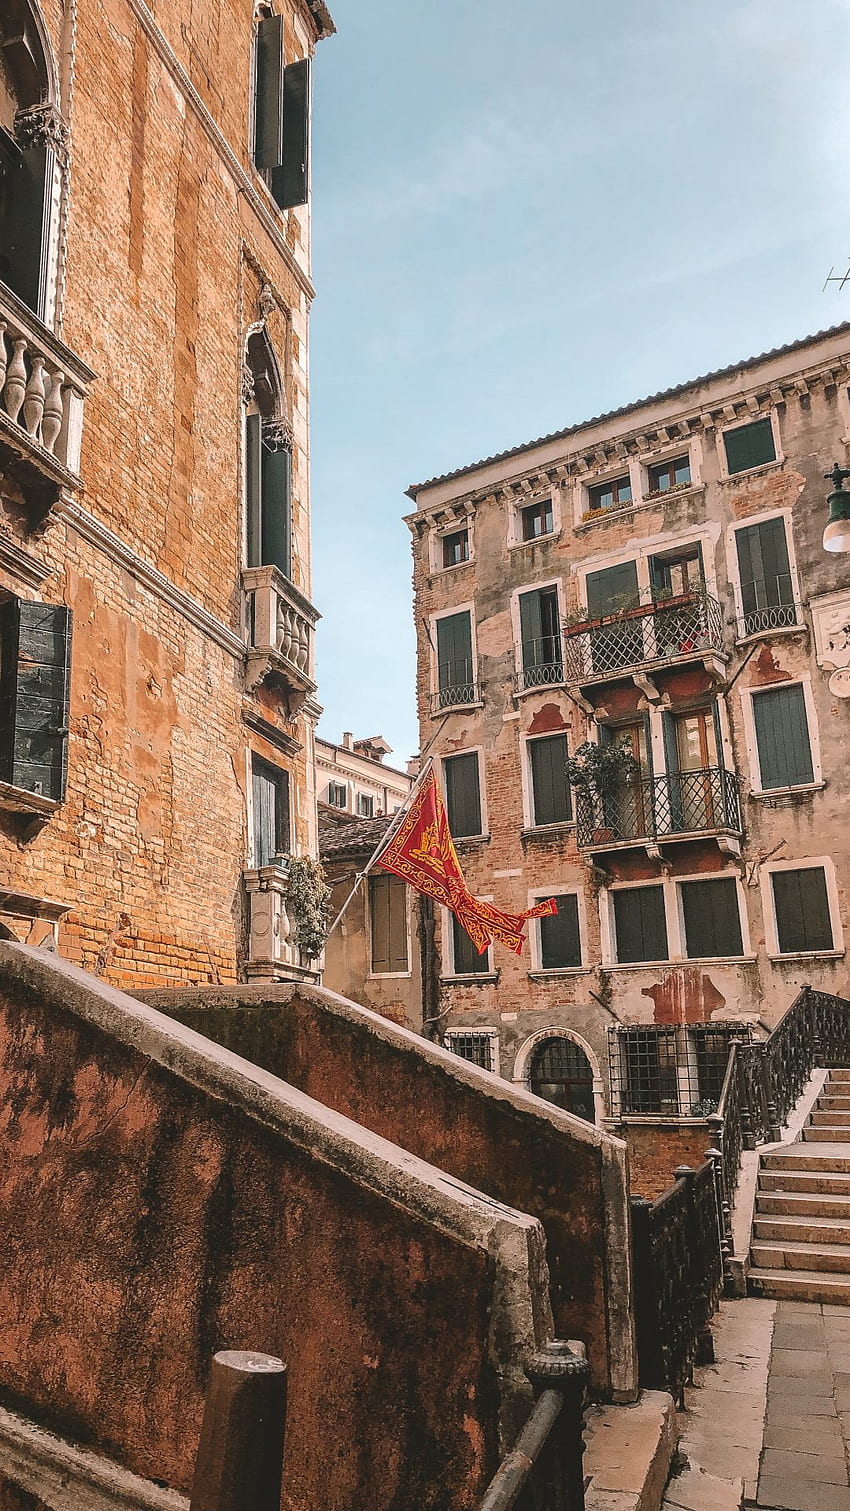 A staircase leading up to an old building - Italy